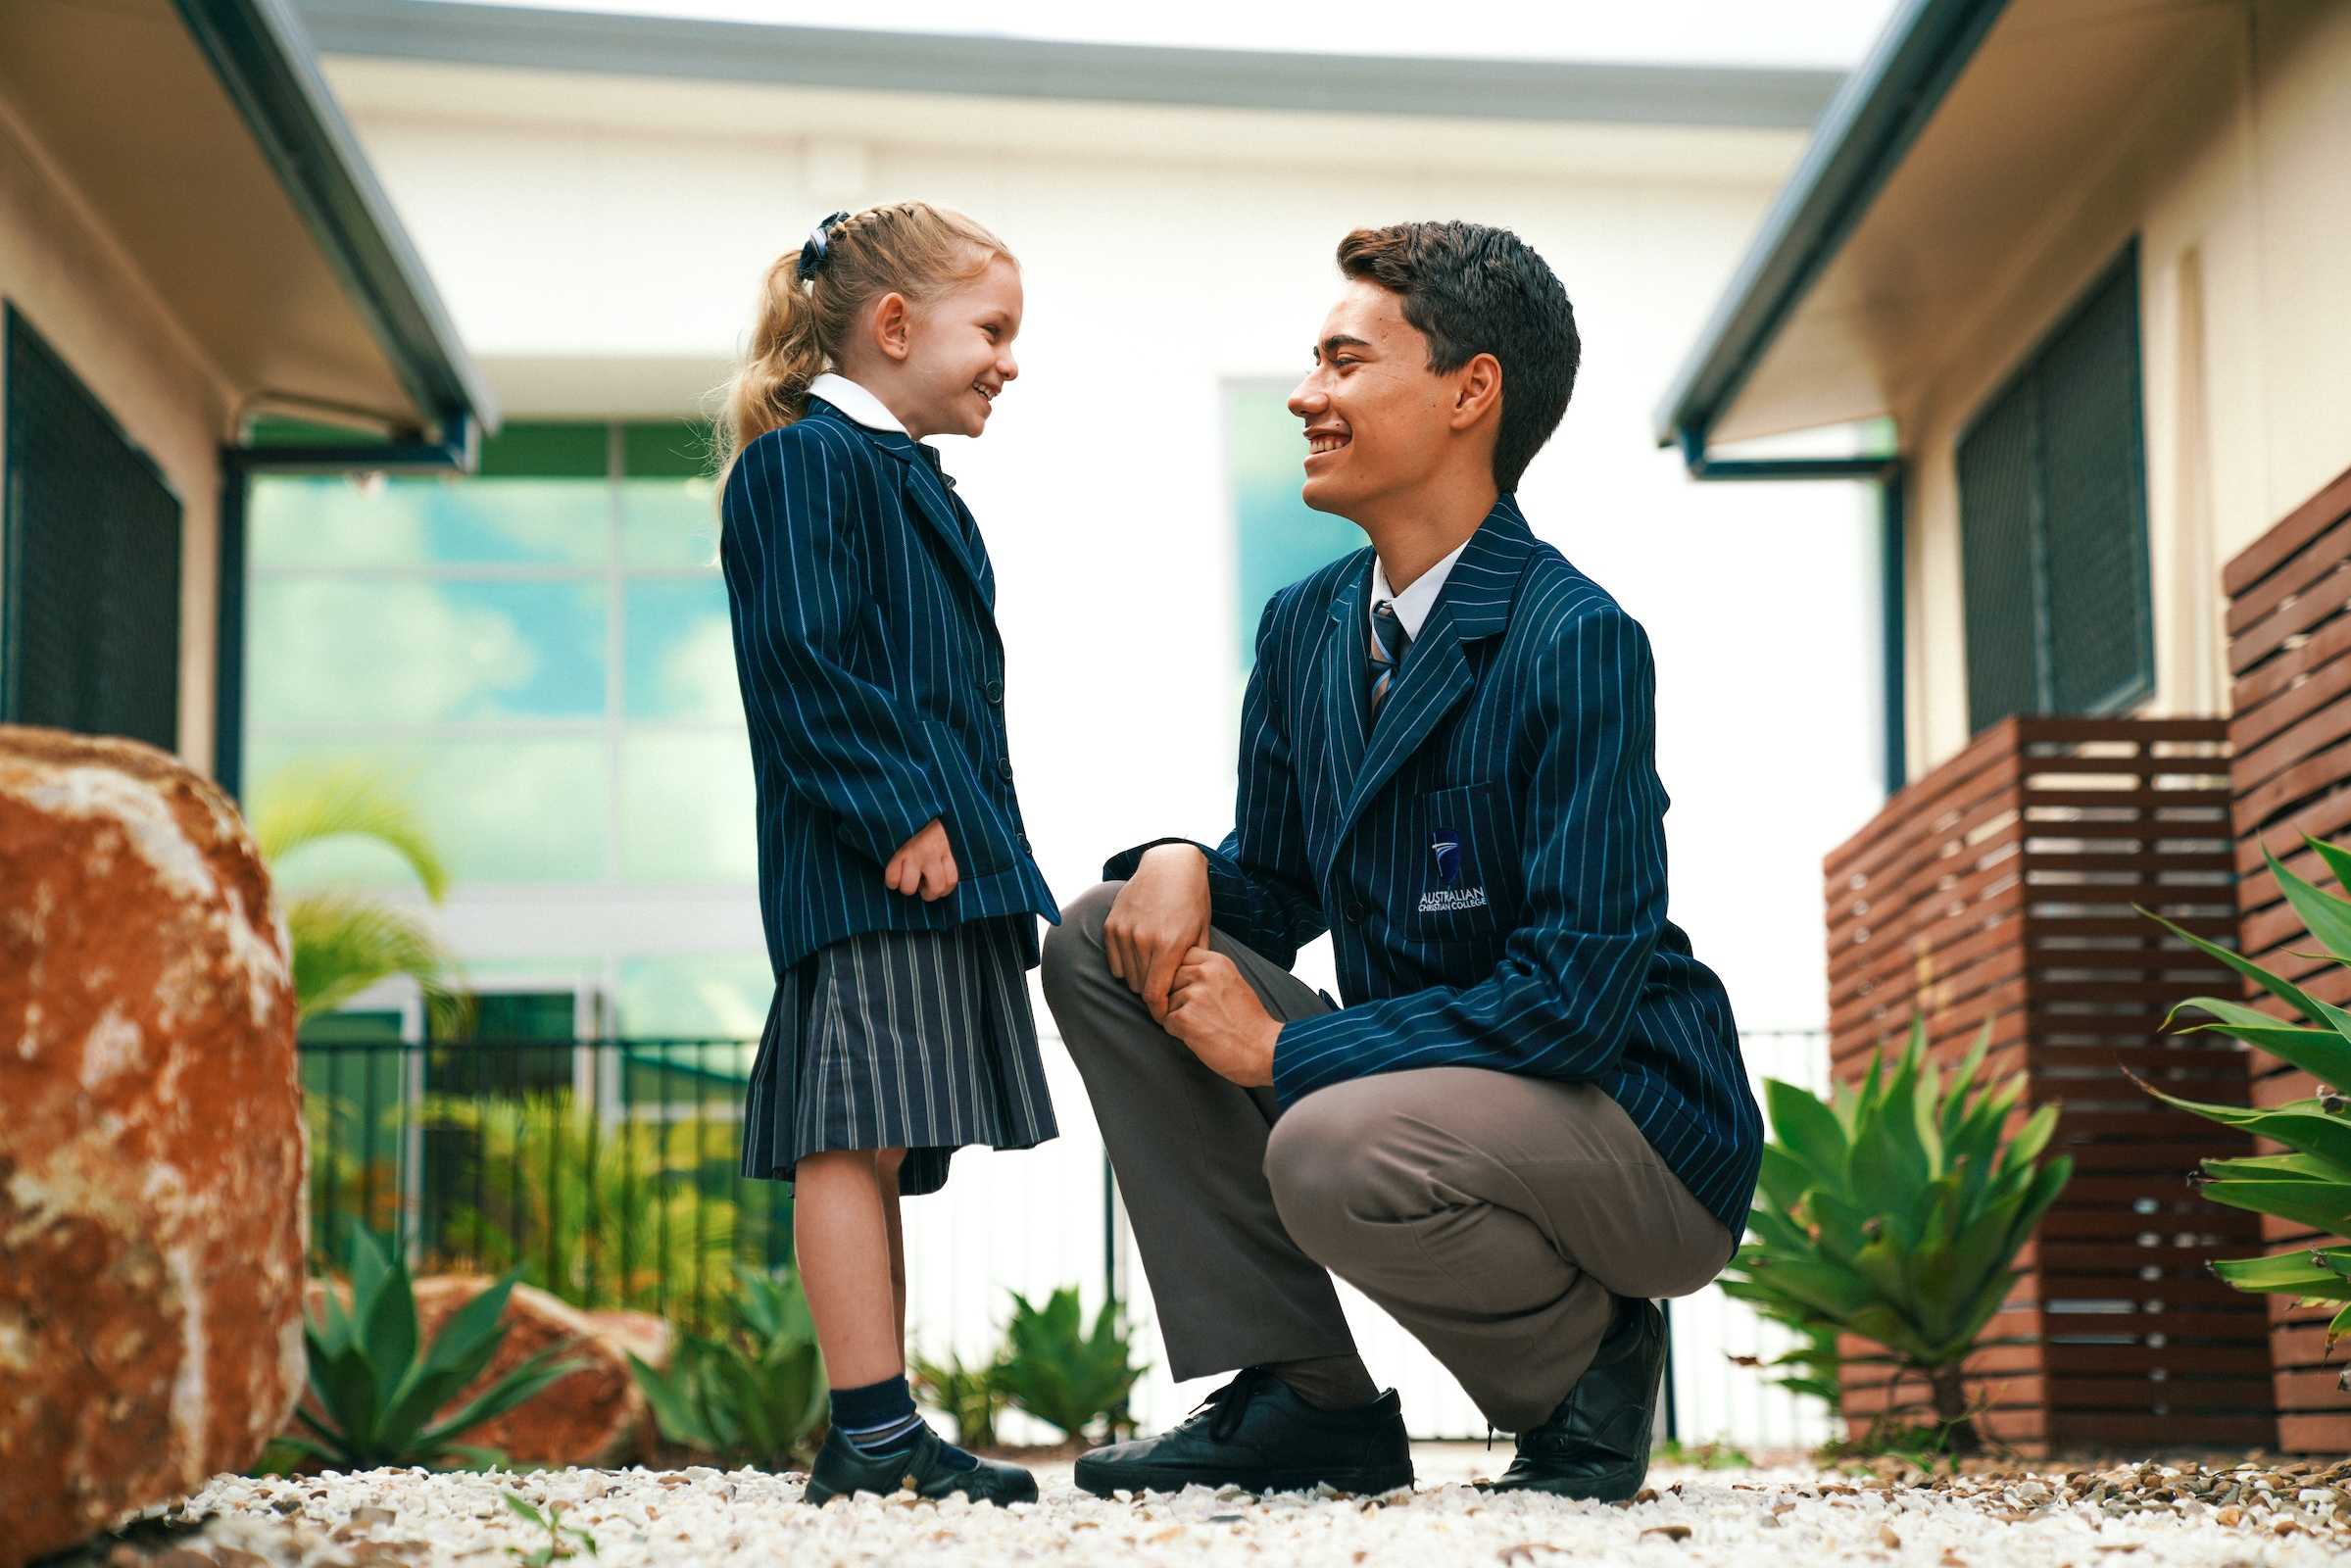 male high school student crouching next to young female primary school student, both smiling at each other